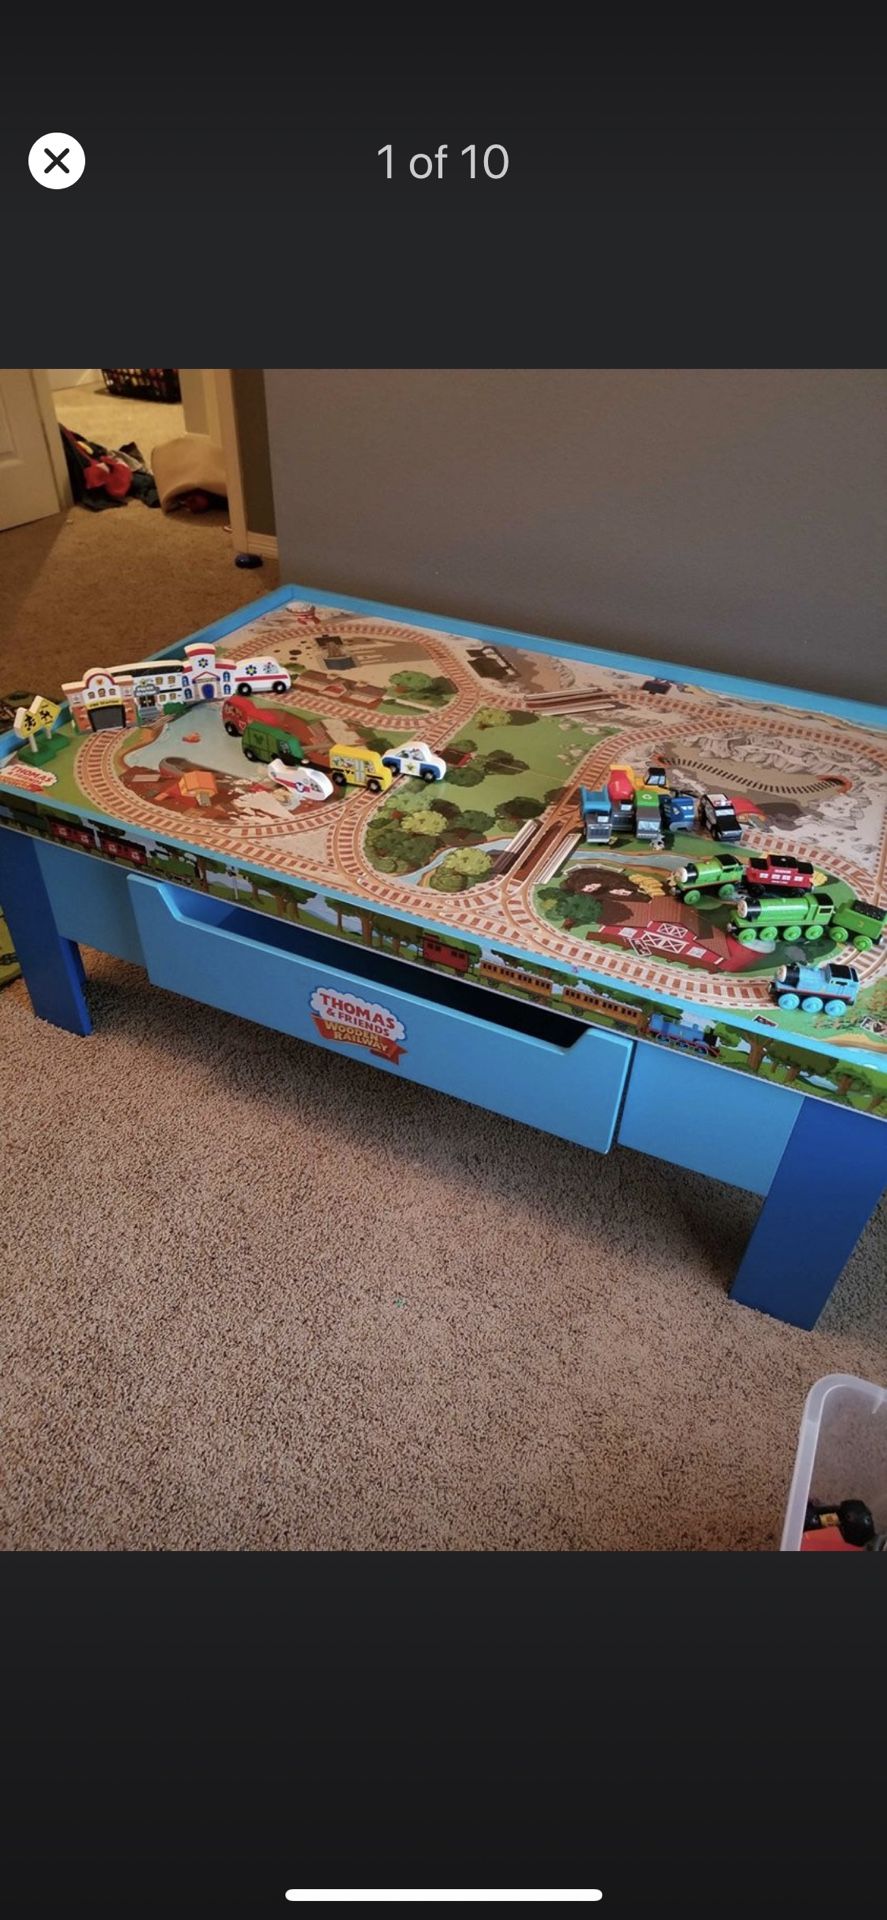 Thomas the train activity table set & with free cars great kids toy